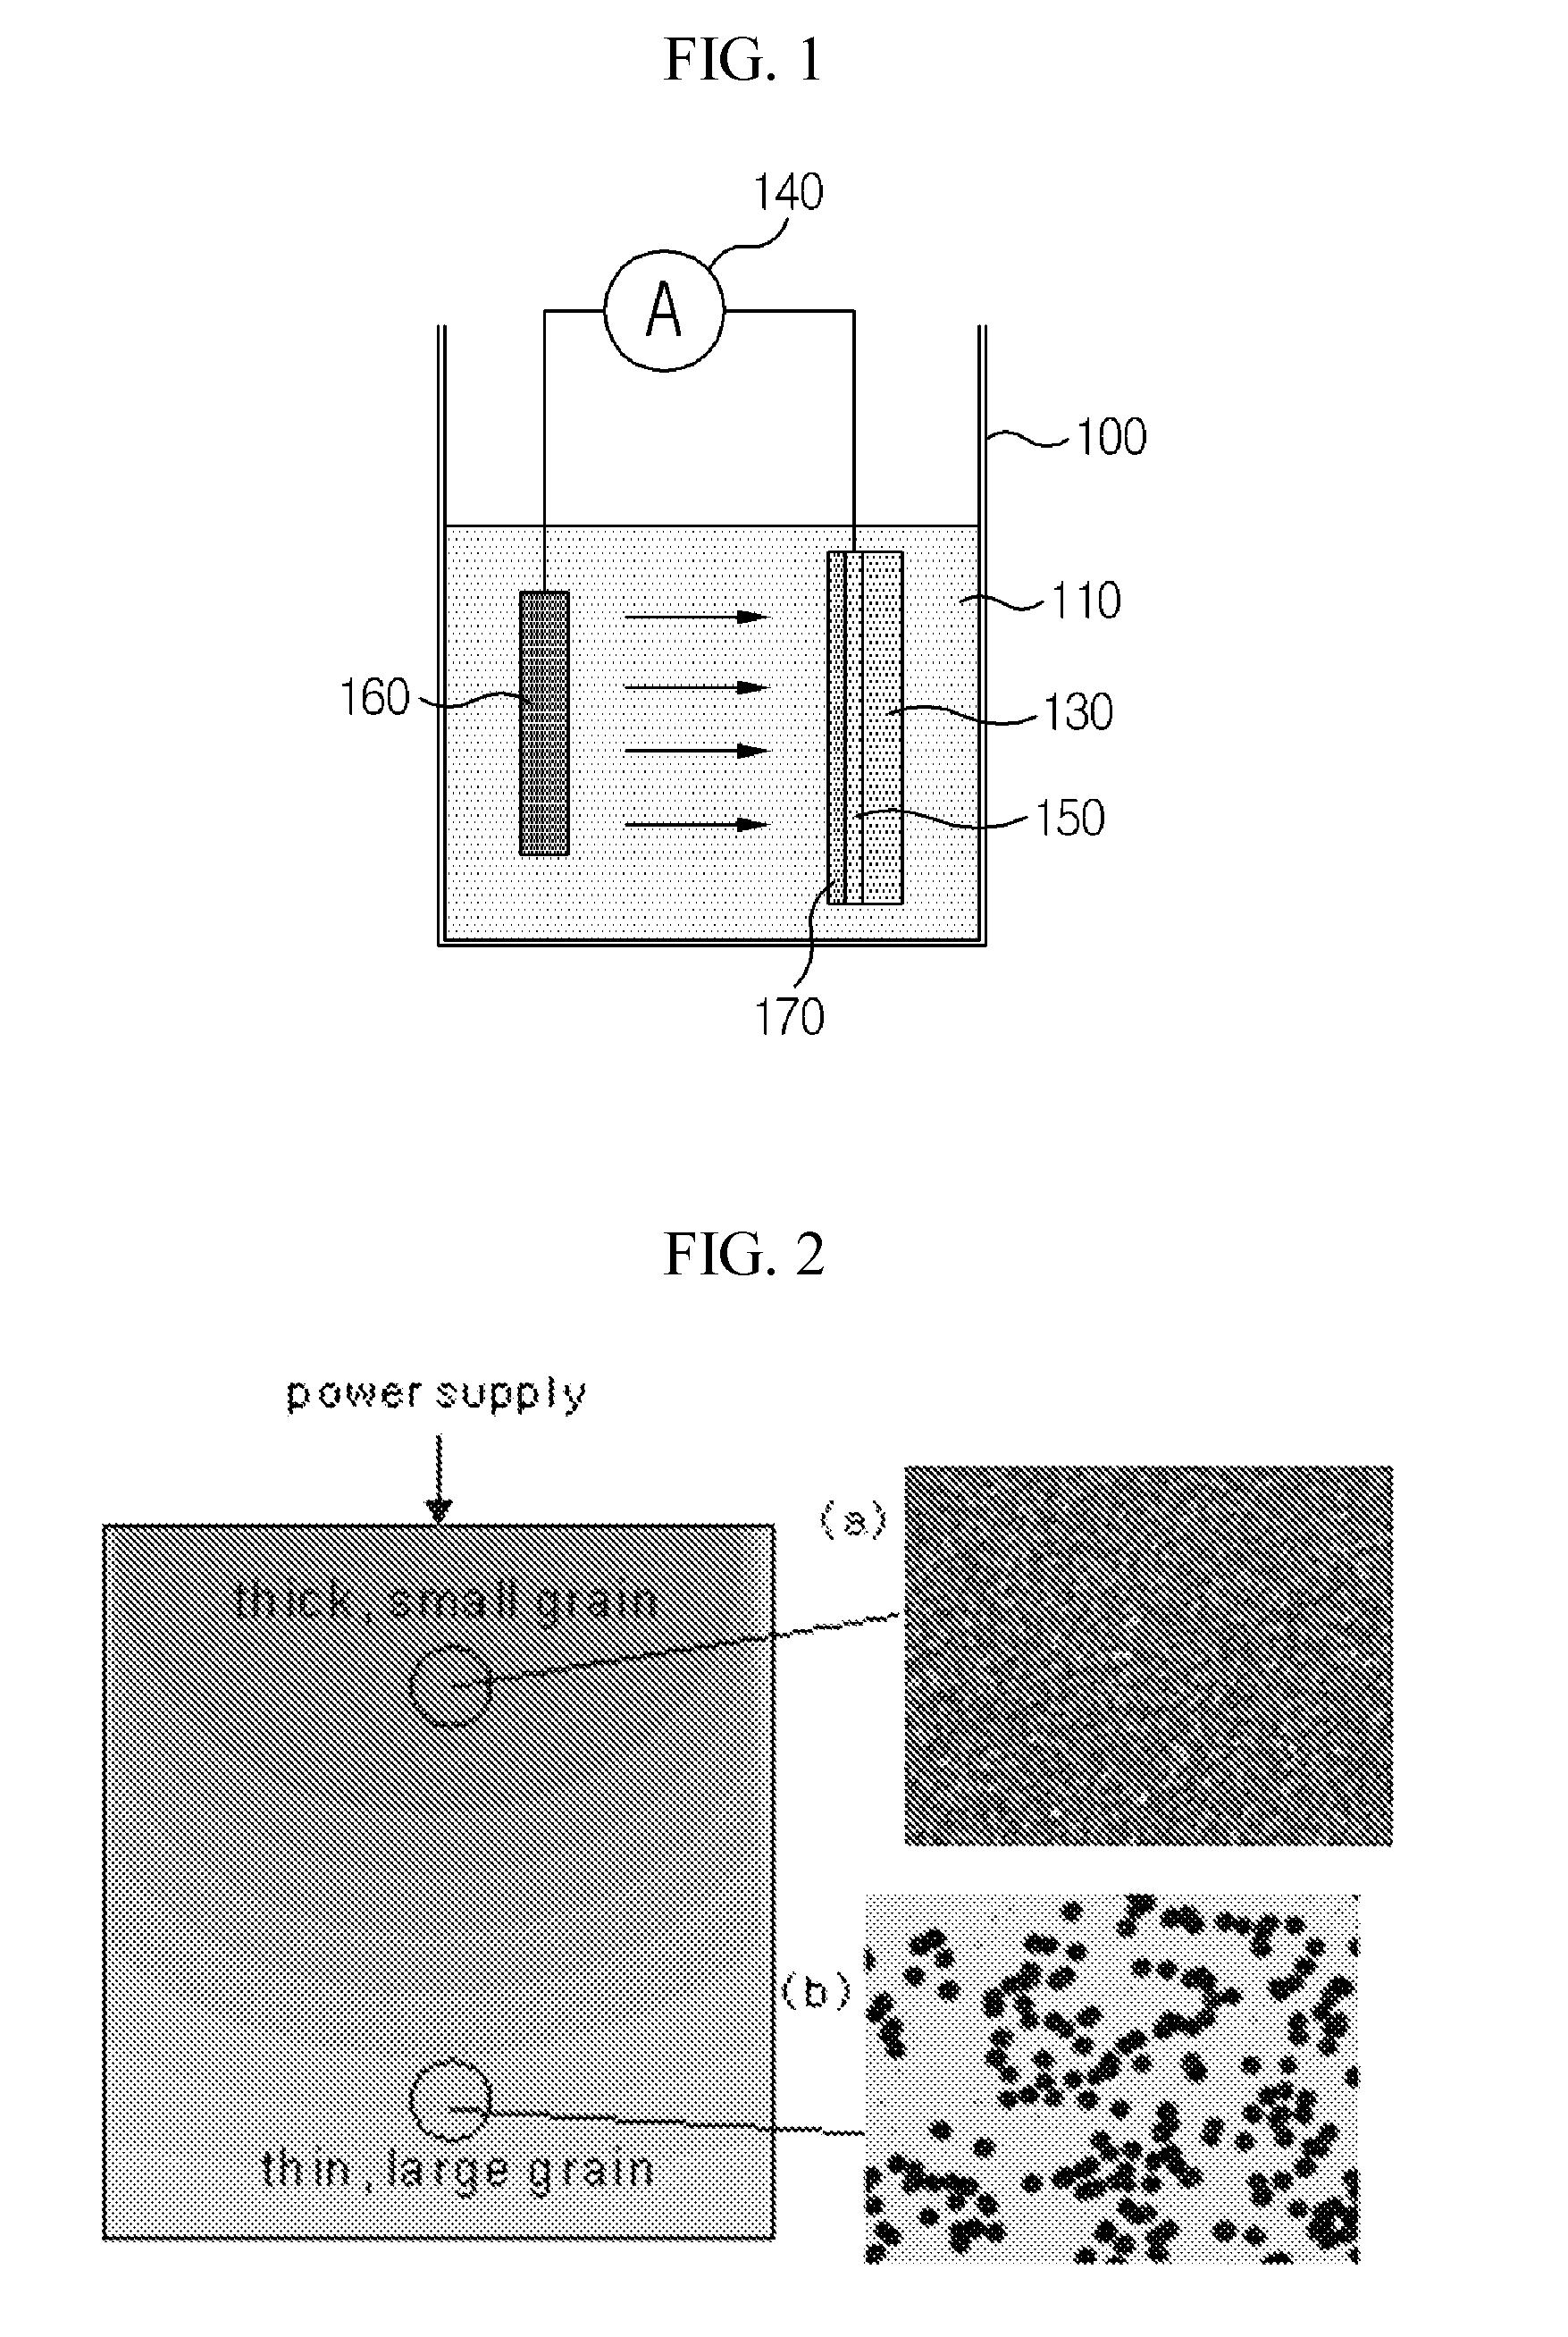 Electroplating apparatus and method